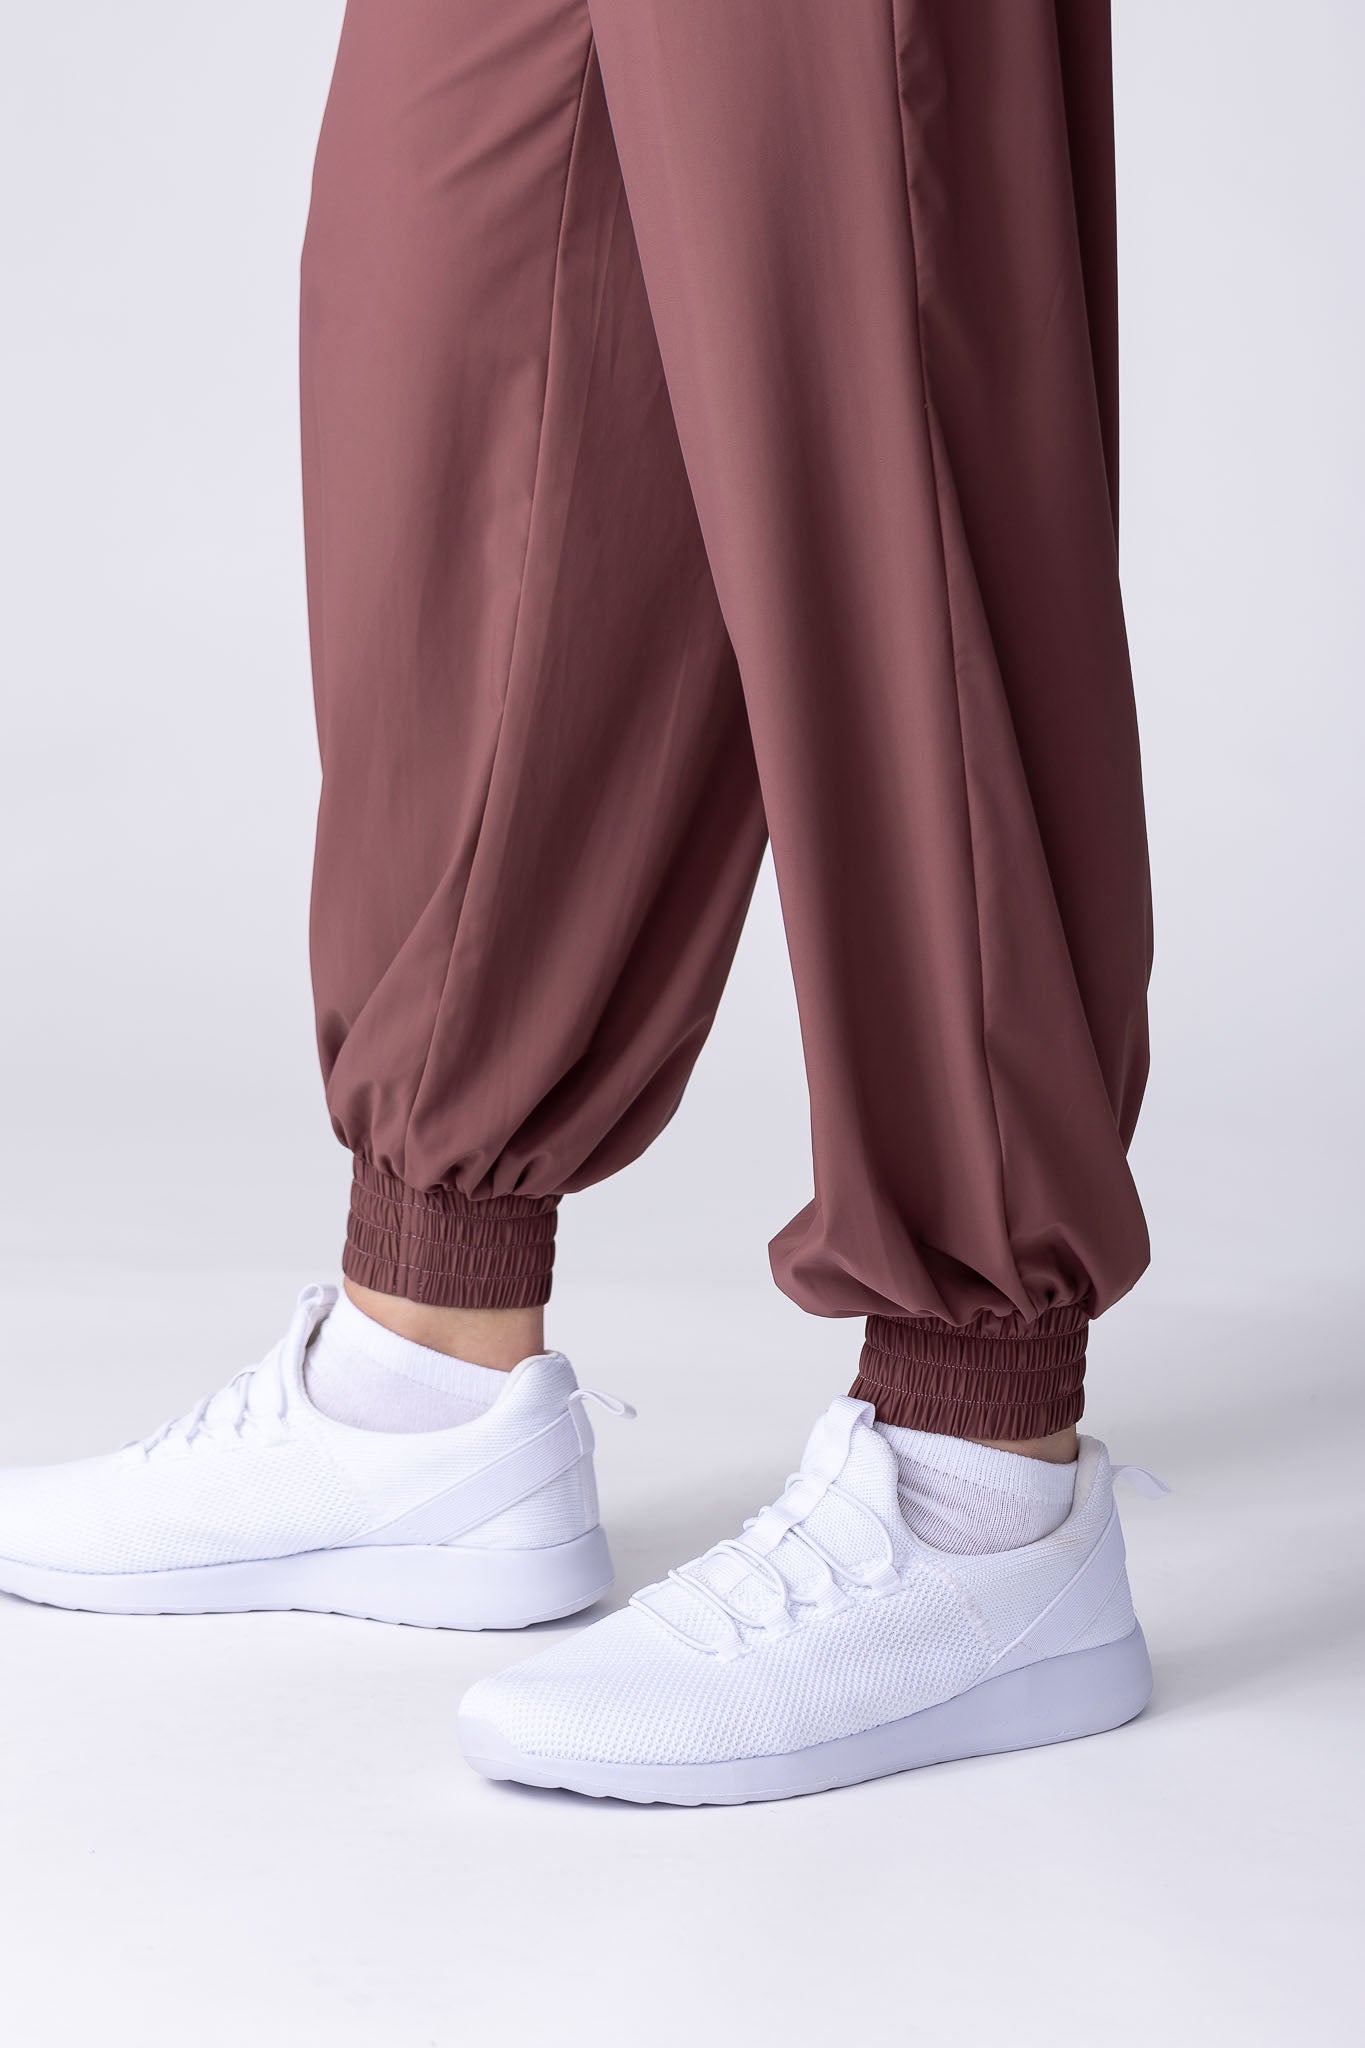 Lightweight joggers in dusty purple, with pockets and hight supportive waist.